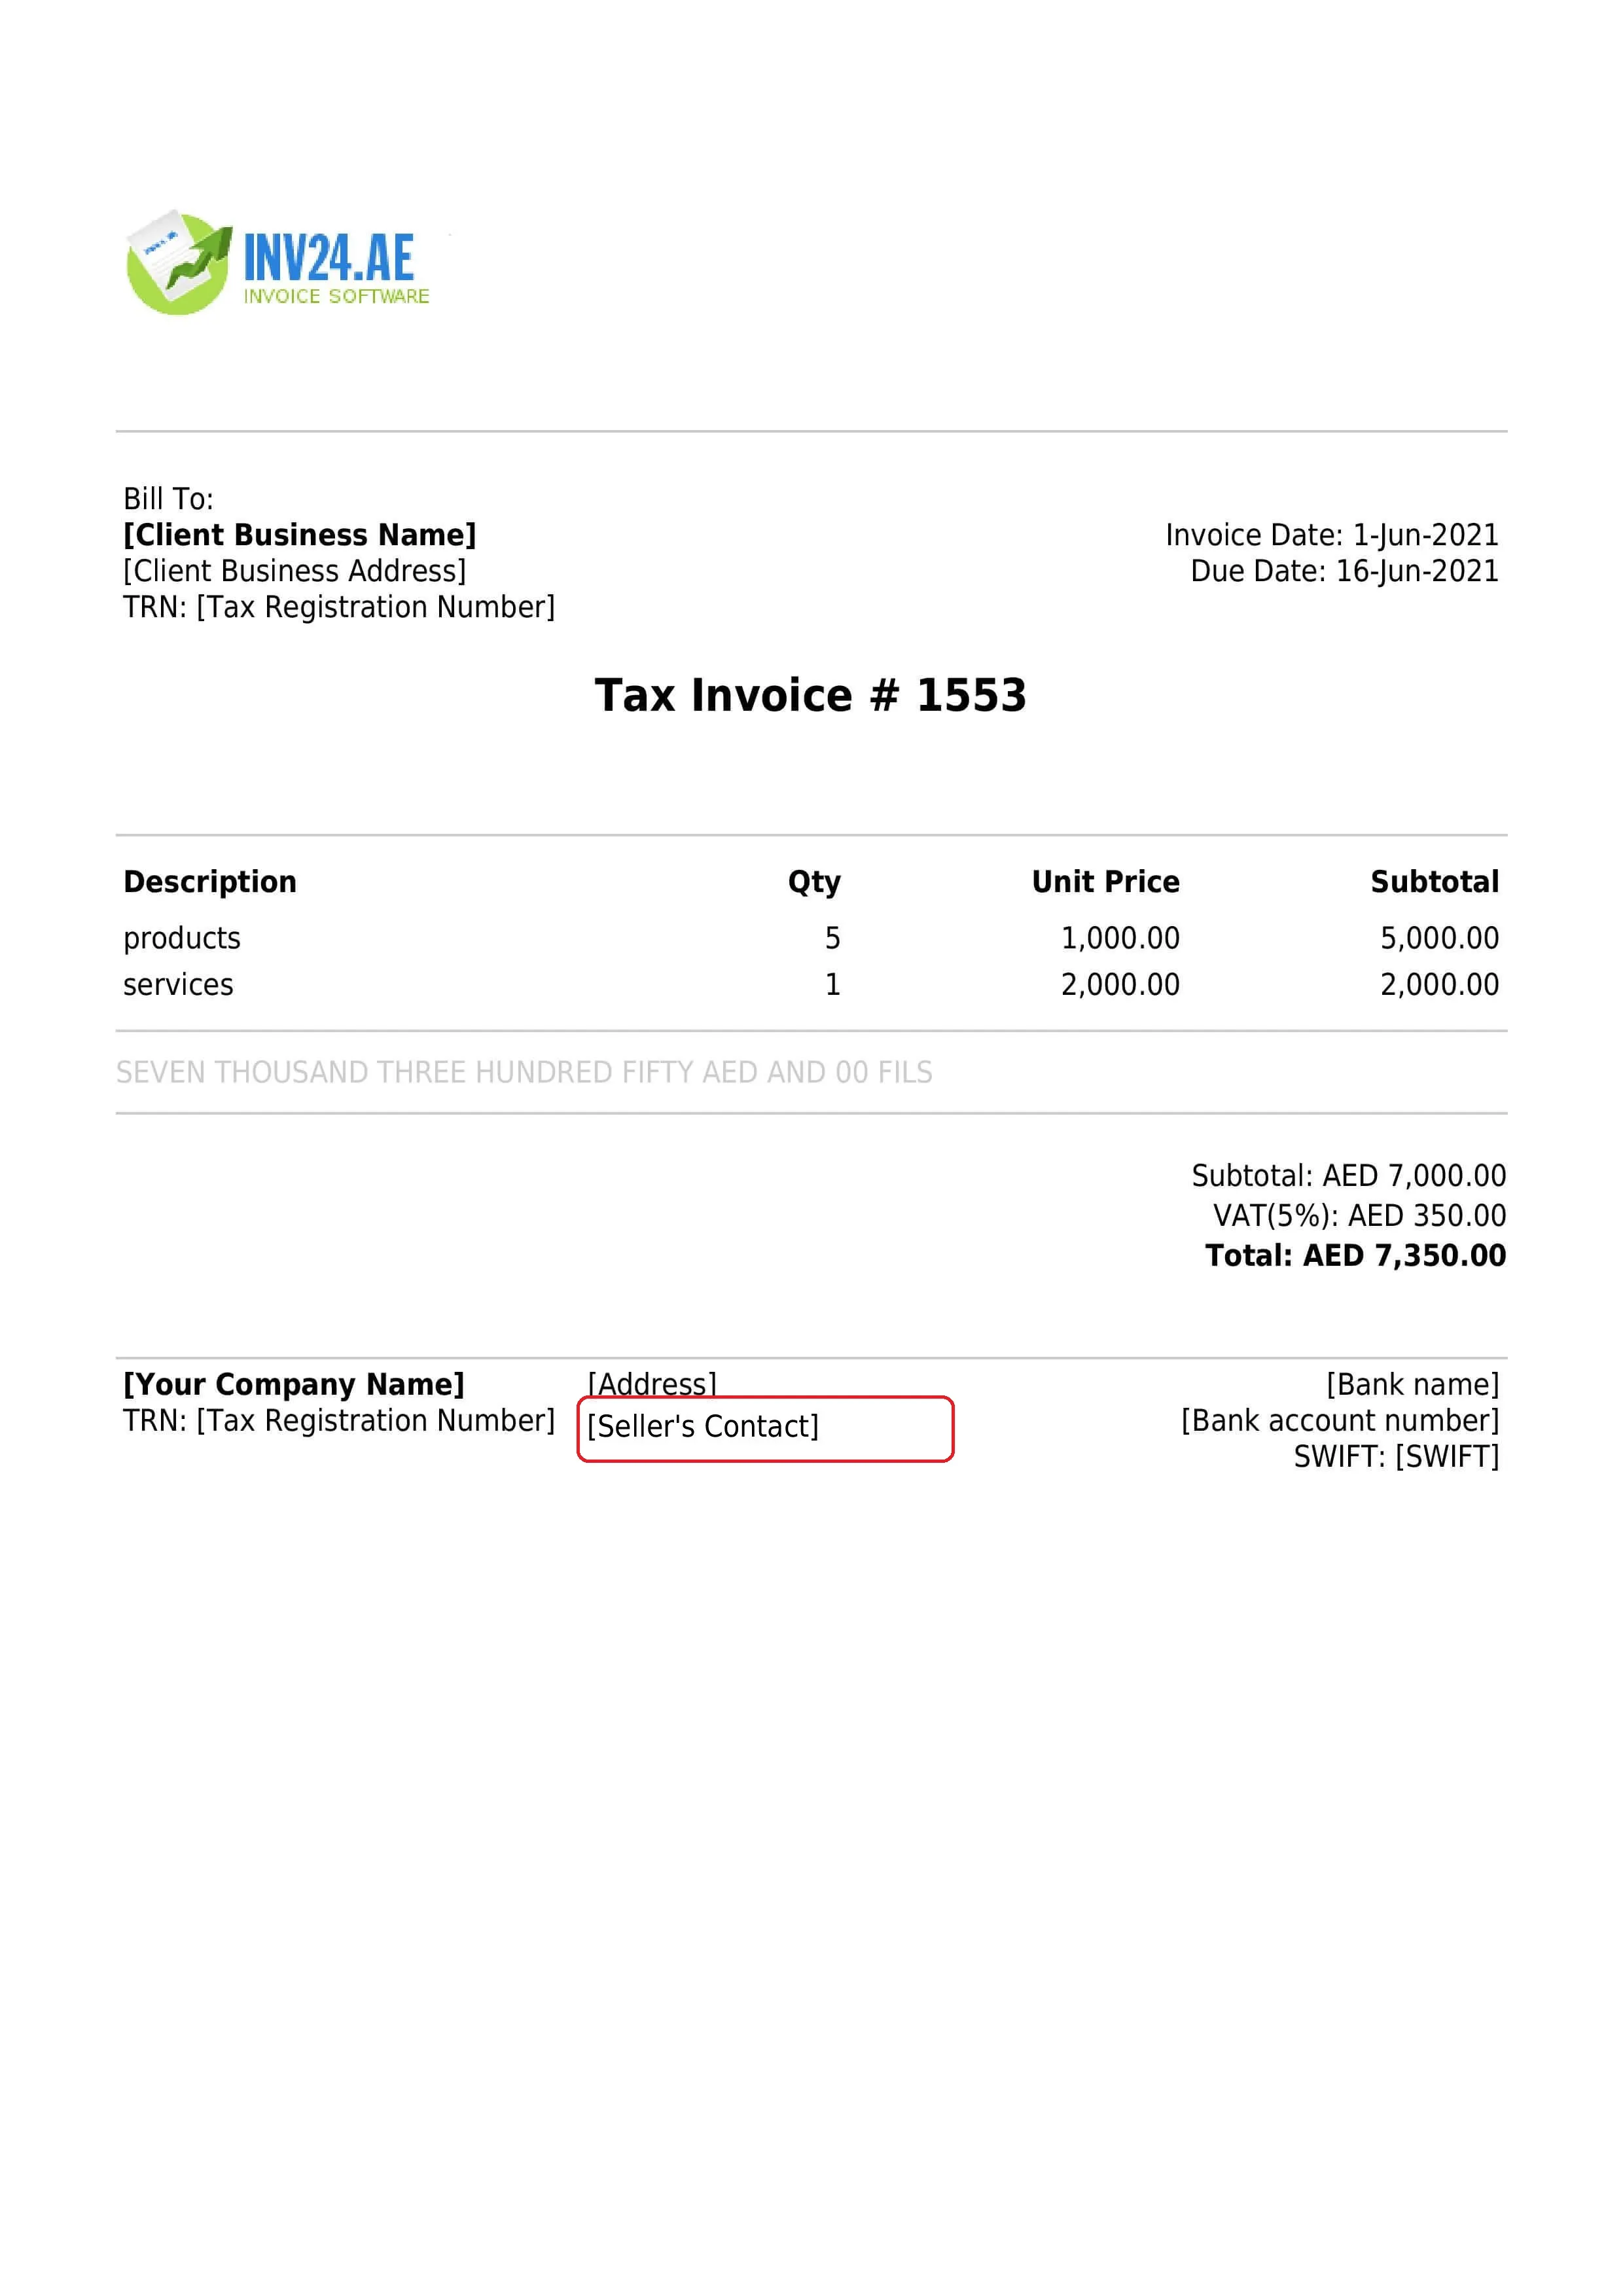 seller's contact on the invoice